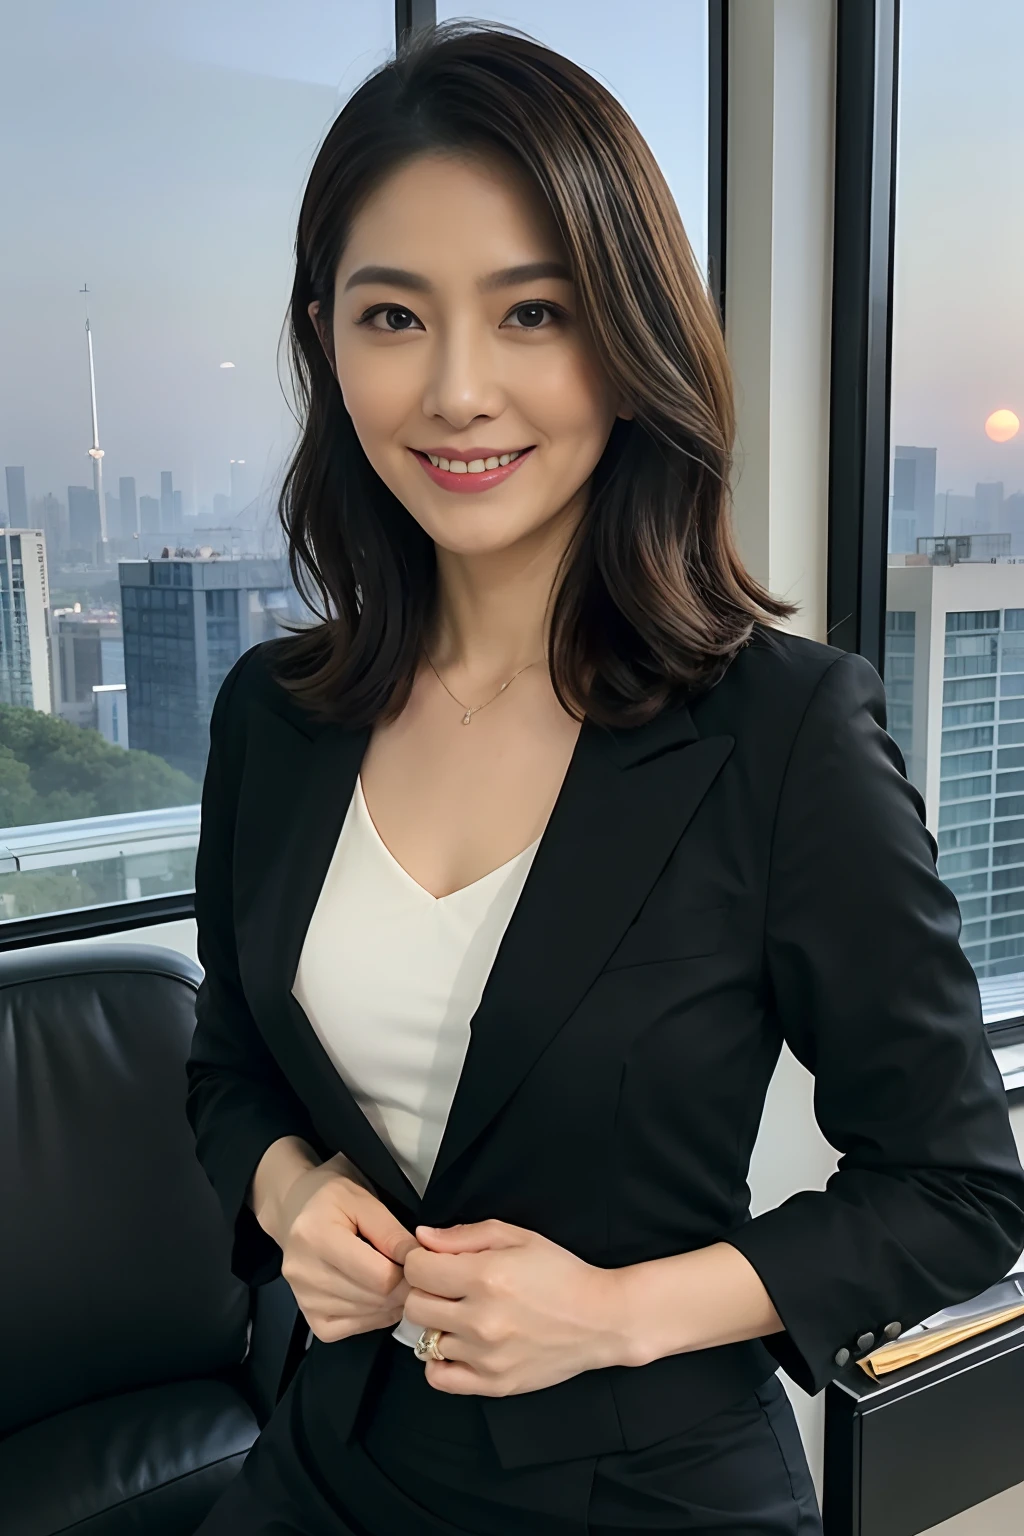 top-quality, (Hairstyle is straight), (Tight black suit jacket), (Tight black suit skirt),(White camisole in satin material), (Glossy white camisole), (Glossy black suit), (black business suits), A smile:0.25, Bewitching face:0.5, Hair color is brown close to black, beautiful japanese female, (30-years old:0.75), (35 year old:0.5), Dark eyeliner, (ultra-sexy:1), slightly muscular, (Smaller chest), High-level ranks, (An office with a lot of computers),(IT Company Office), (Sunset view of skyscrapers)